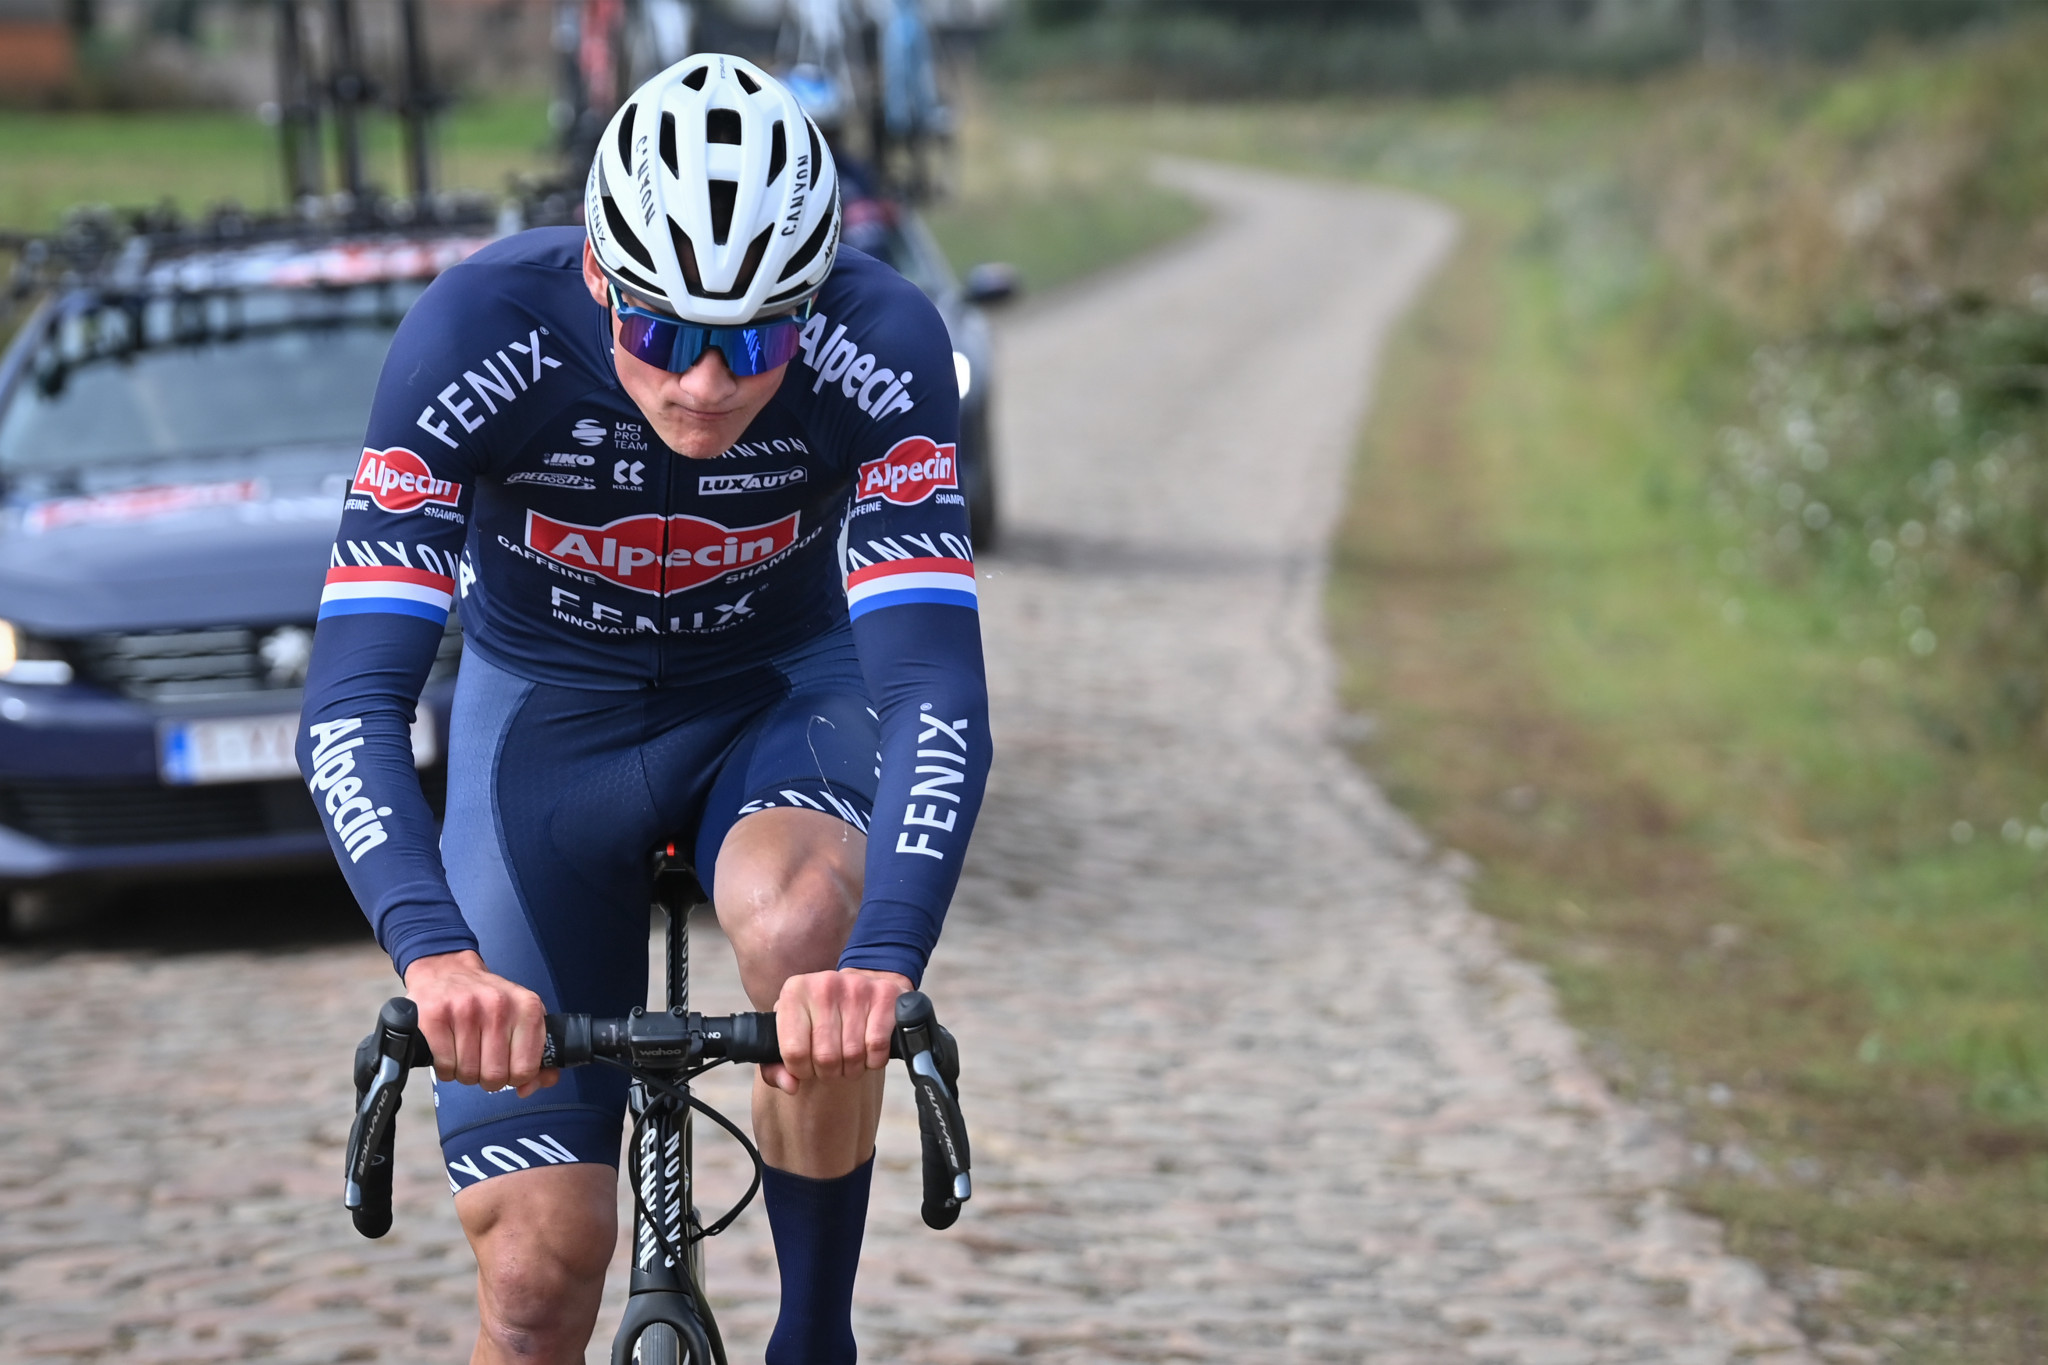 Van der Poel confirmed for Milan-San Remo as other contenders suffer illnesses